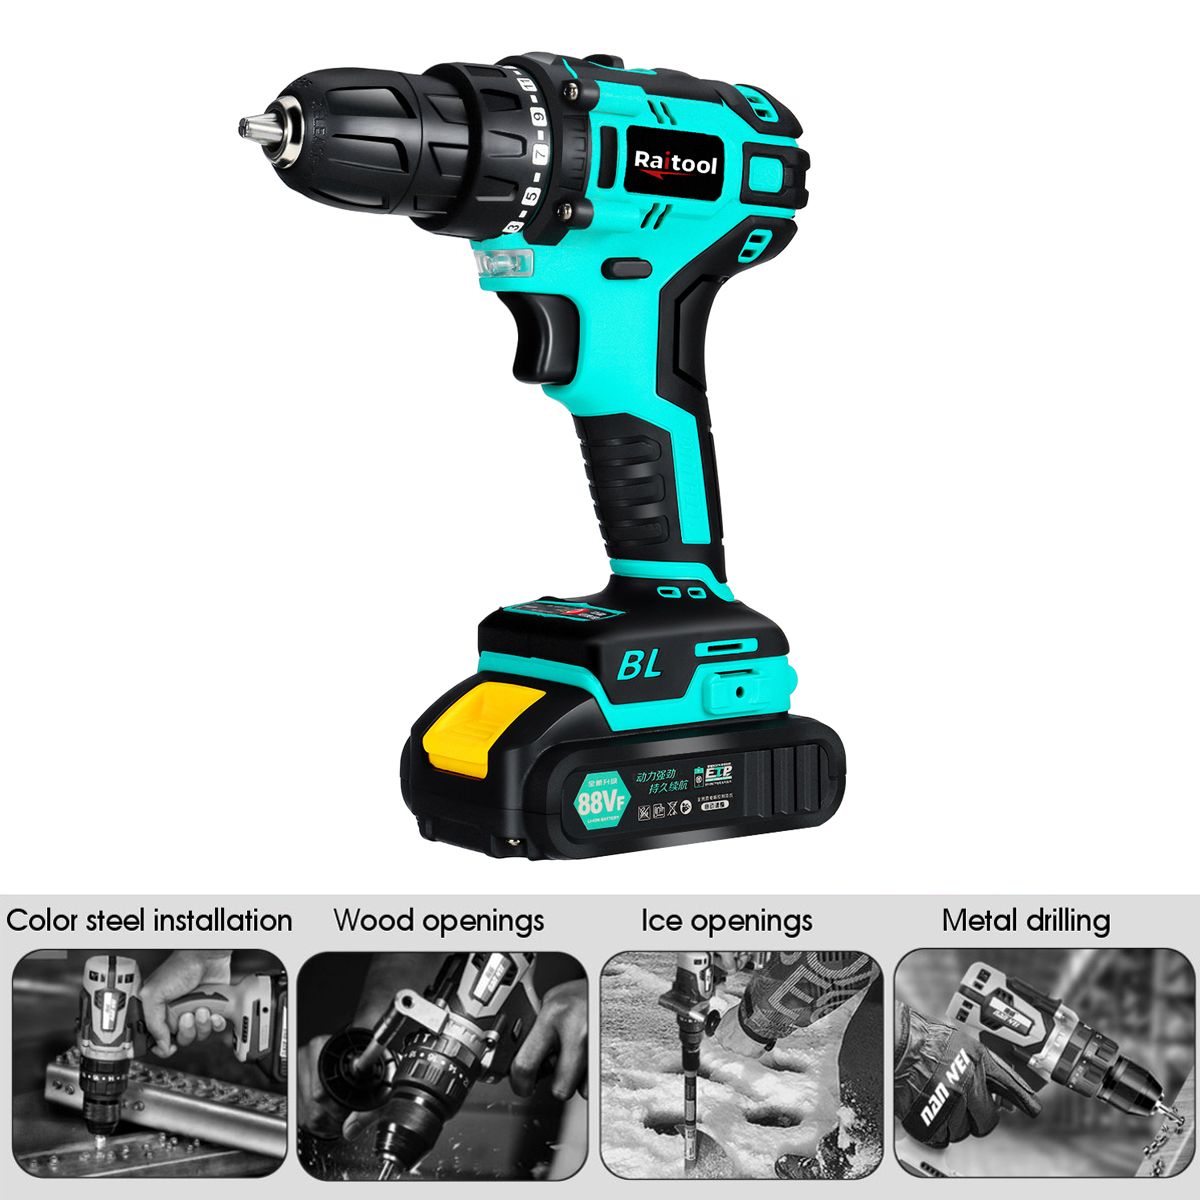 Raitool-RT-ED1-88VF-LED-Brushless-Electric-Drill-23-Torque-Cordless-Rechargeable-Power-Drill-W-1-or--1734969